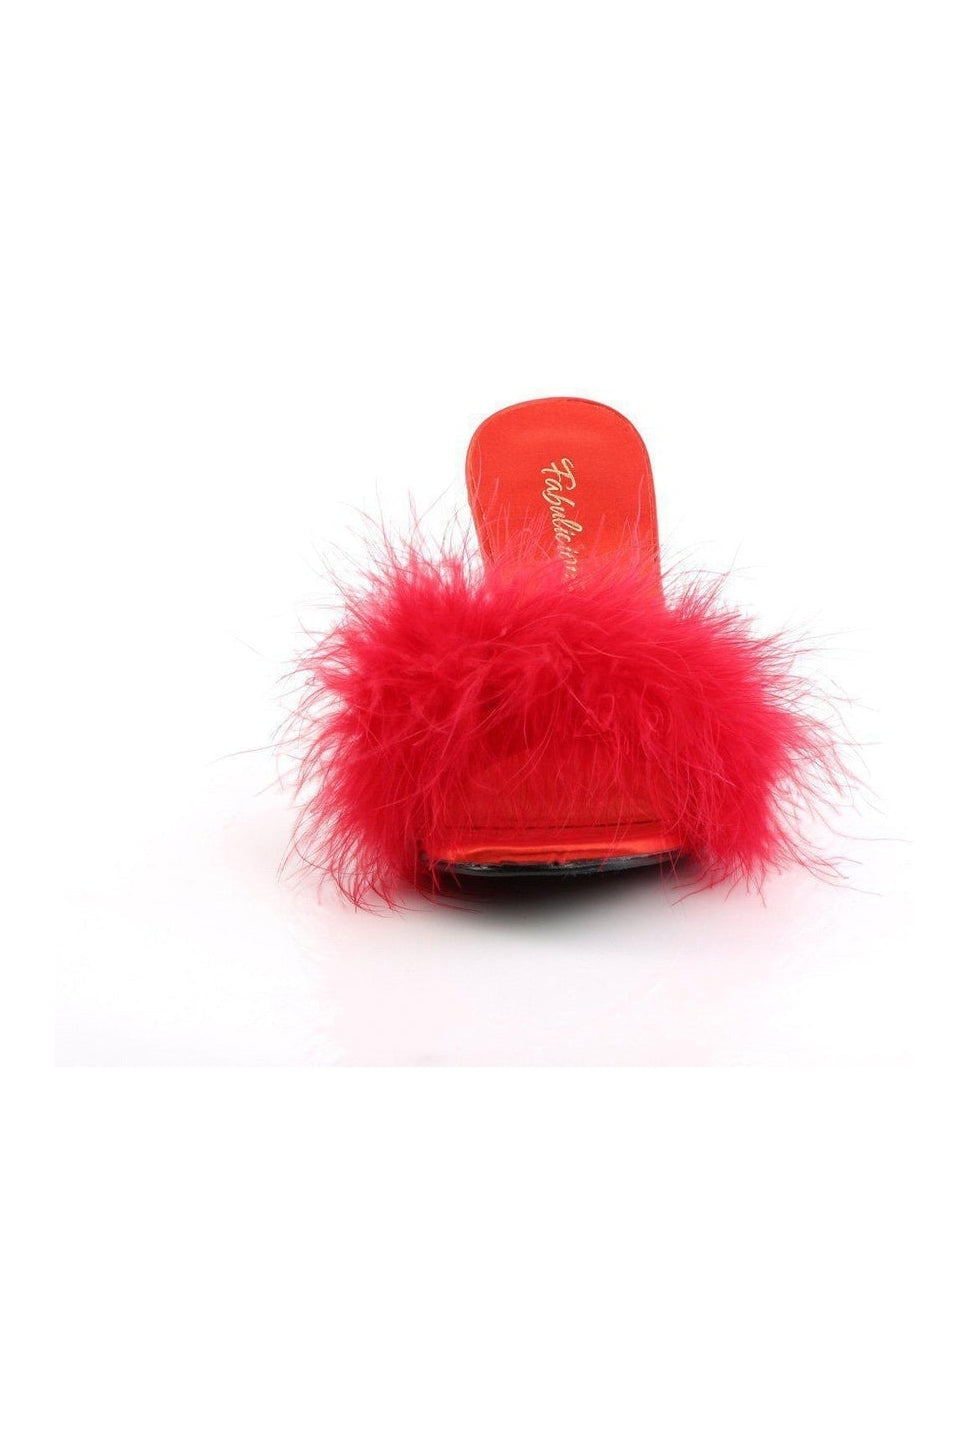 AMOUR-03 Slide | Red Genuine Satin-Slides-Fabulicious-SEXYSHOES.COM